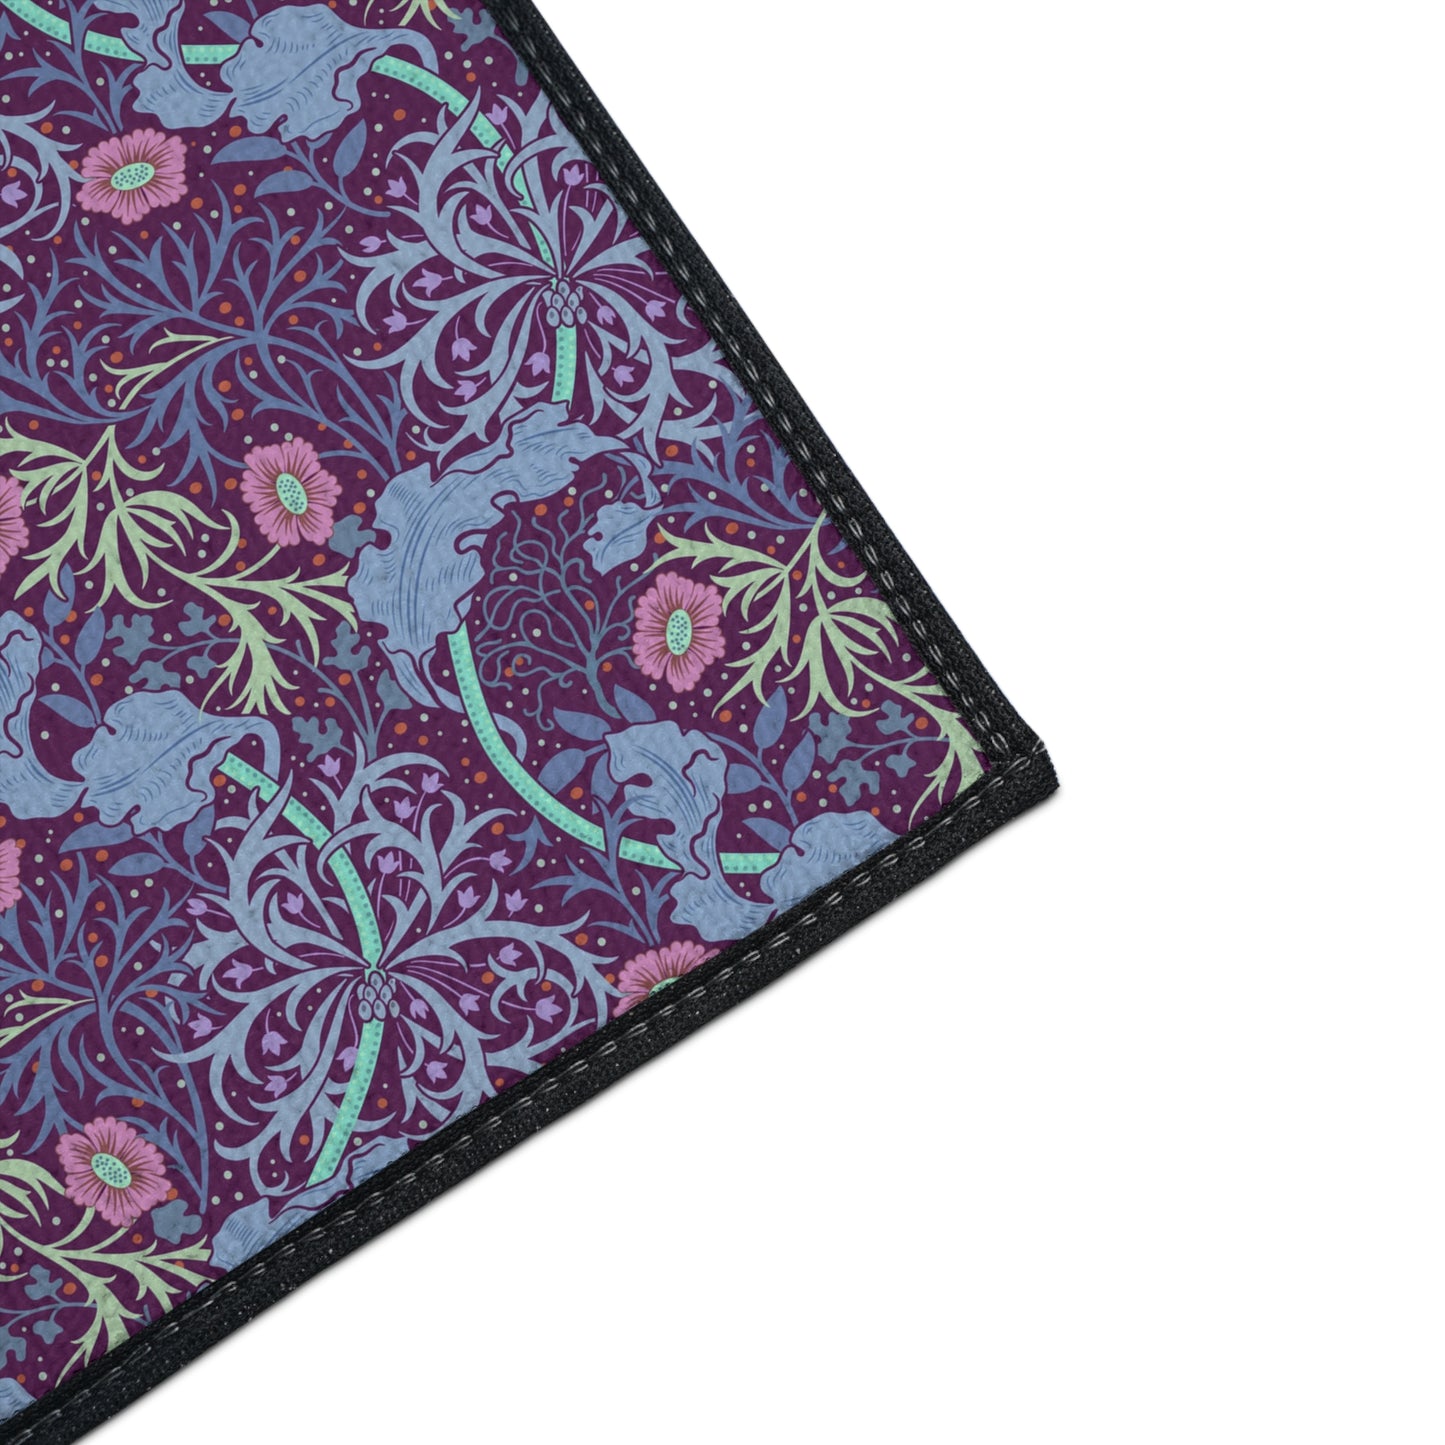 william-morris-co-heavy-duty-floor-mat-seaweed-collection-pink-flowers-14